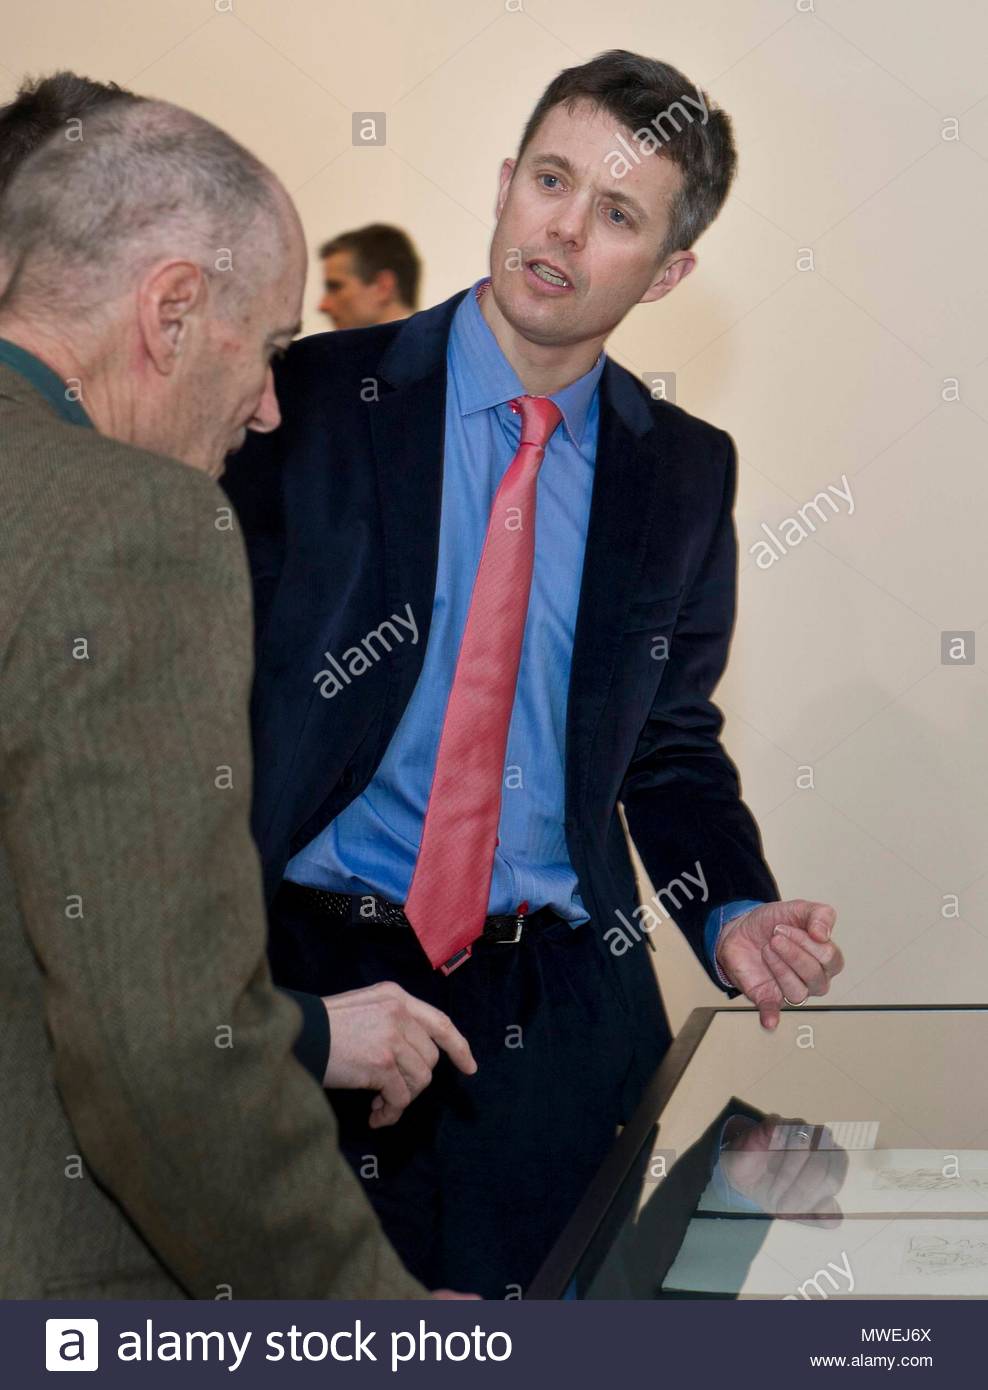 per-kirkeby-and-crown-prince-frederik-crown-prince-frederik-takes-part-in-the-opening-of-the-exhibition-per-kirkeby-and-greenland-the-secret-reservoir-at-the-art-museum-ordrupgaard-north-of-copenhagen-the-exhibition-shows-the-danish-artist-per-kirkebys-fascination-for-greenland-and-the-northern-arctic-regions-for-more-than-50-years-code-03407hjp-photo-hanne-juul-all-over-press-denmark-MWEJ6X.jpg